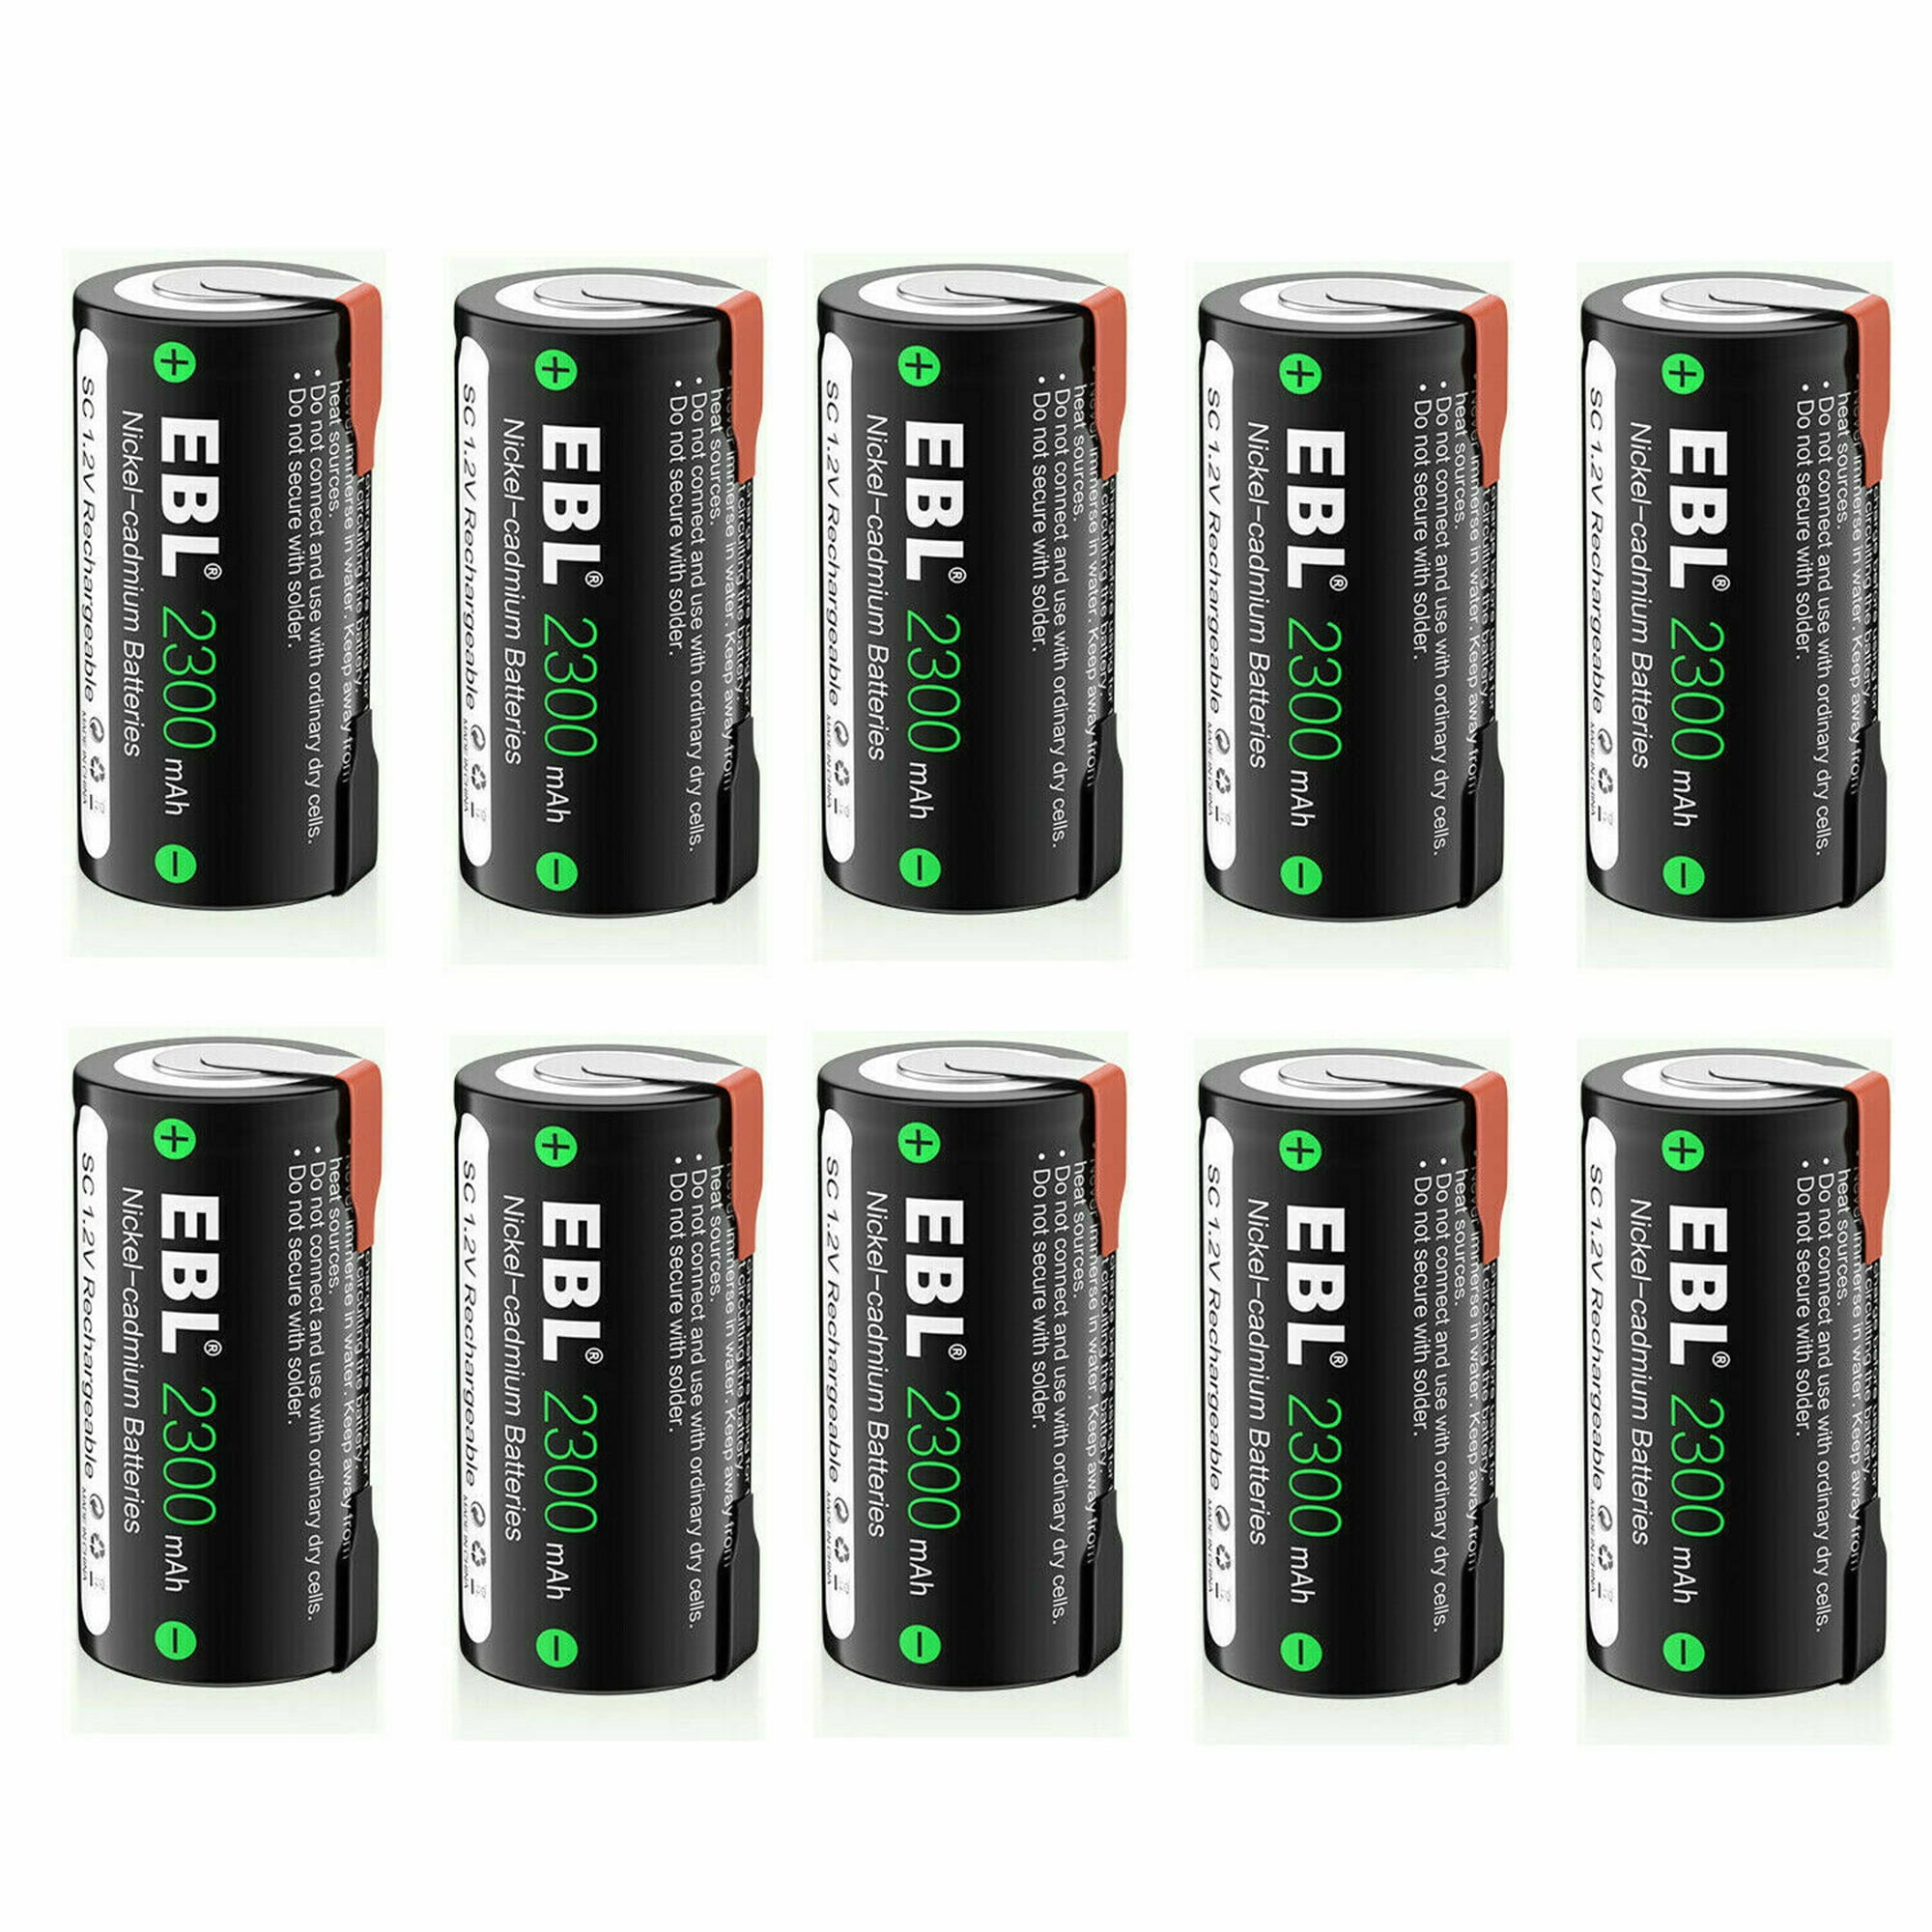 4-12x 2800mAh 3.7V Li-Ion CR123A 16340 123A CR123 L123A Akku für Arlo Kamera OH 